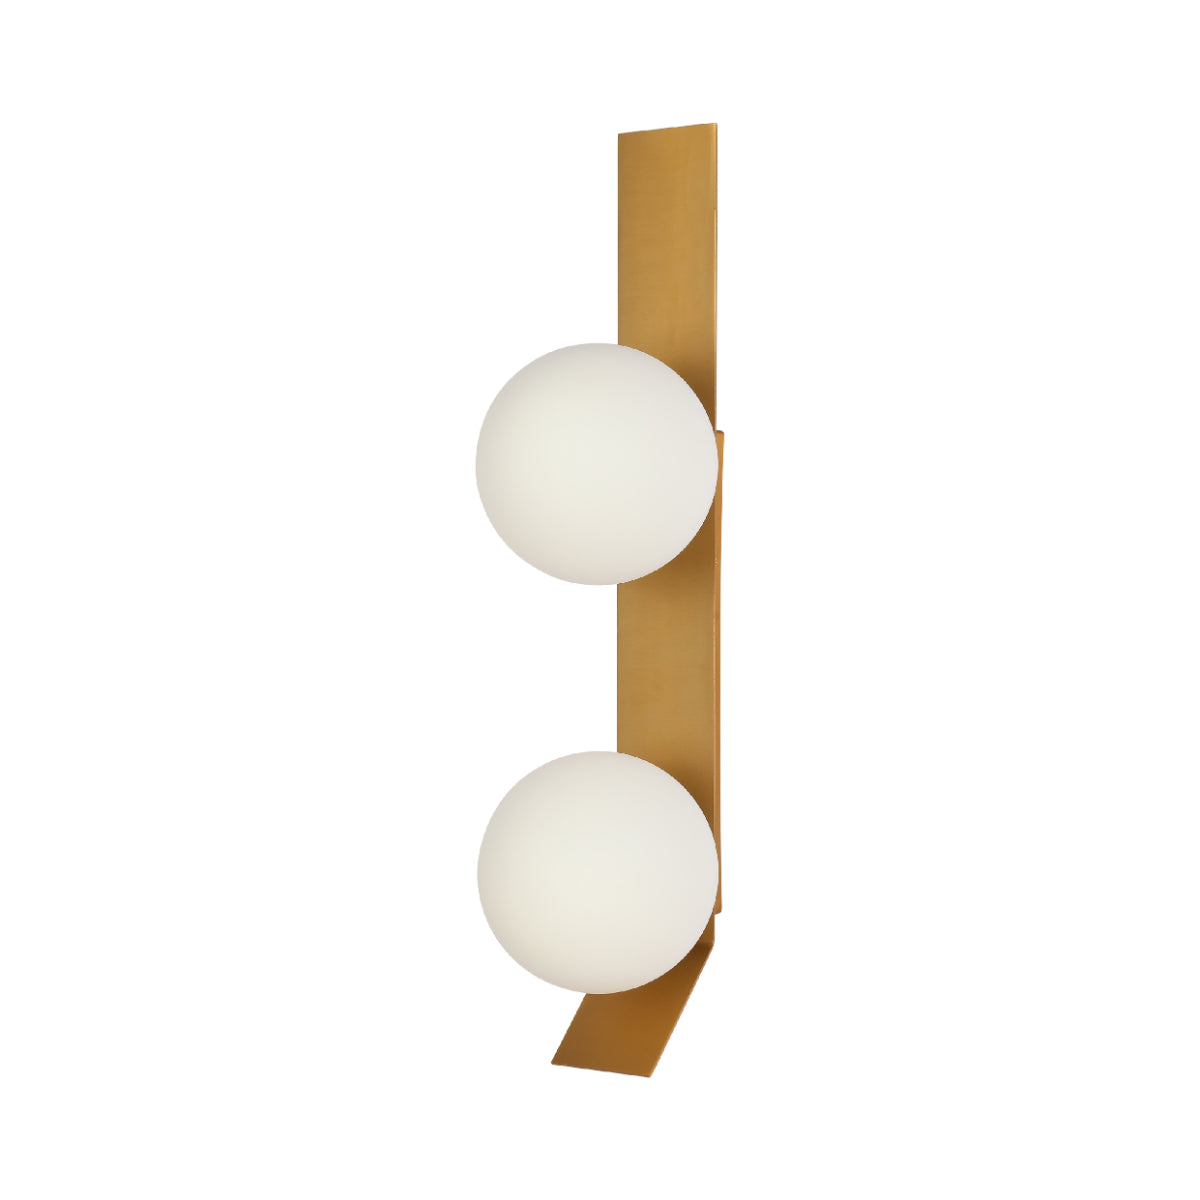 Main image of Contemporary Adjustable Globe Wall Sconce Light 151-19972